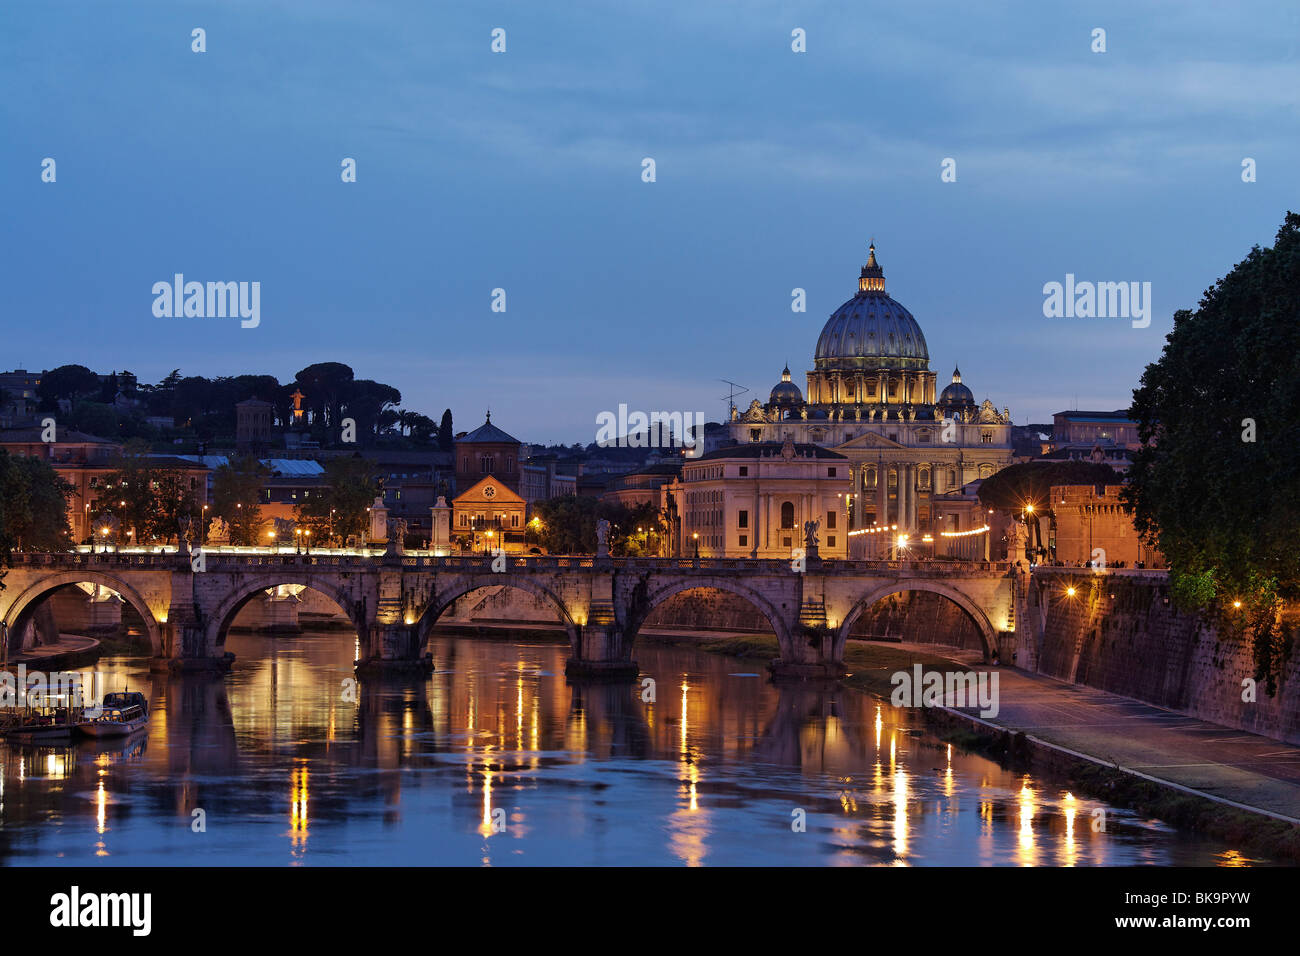 St. Peter's Basilica in the evening, Vatican City, Rome, Italy Stock Photo